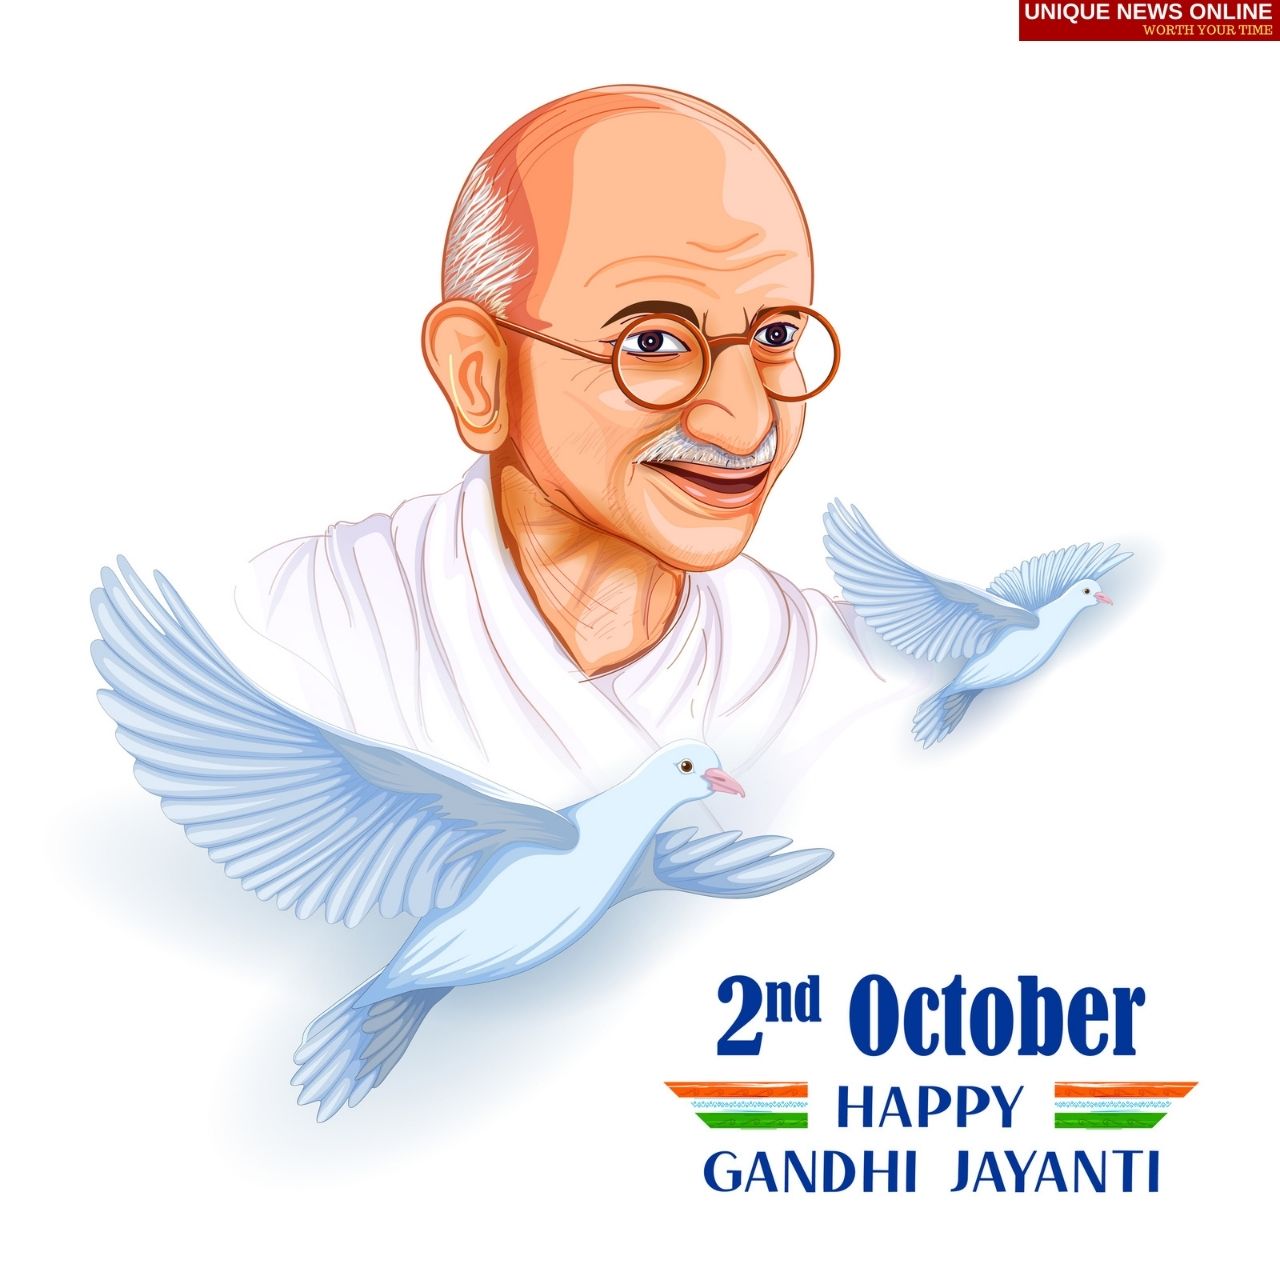 Gandhi Jayanti 2021 Wishes, Quotes, HD Images, Messages, DP, Greetings, and  Slogans to share